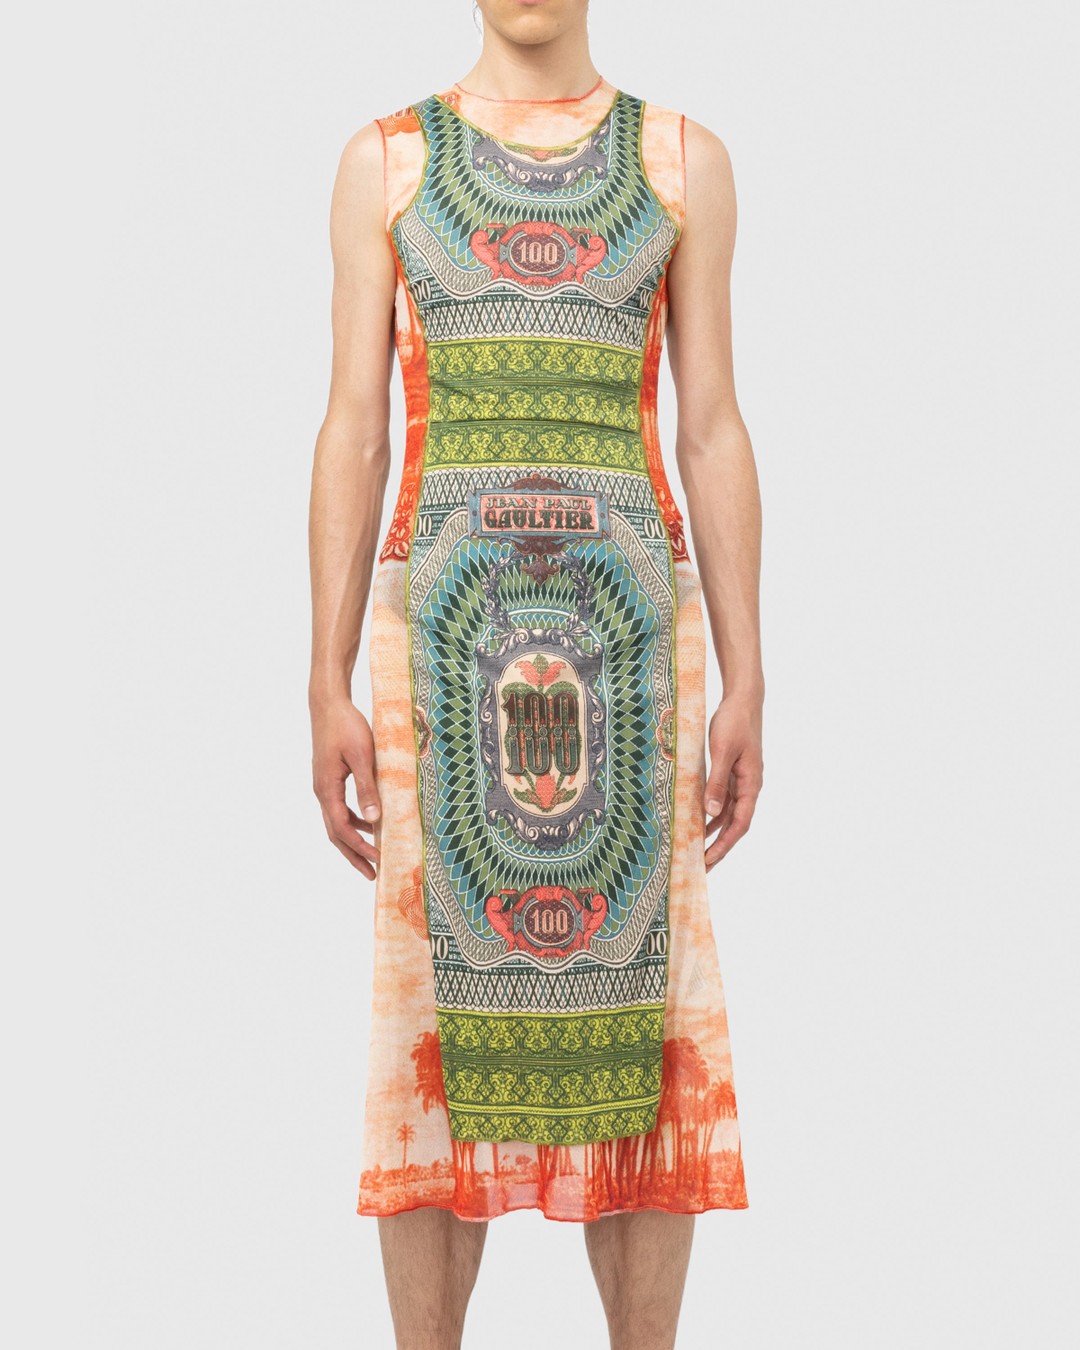 Jean Paul Gaultier – Banknote and Palm Tree Print Dress Multi - Dresses & Skirts - Green - Image 2